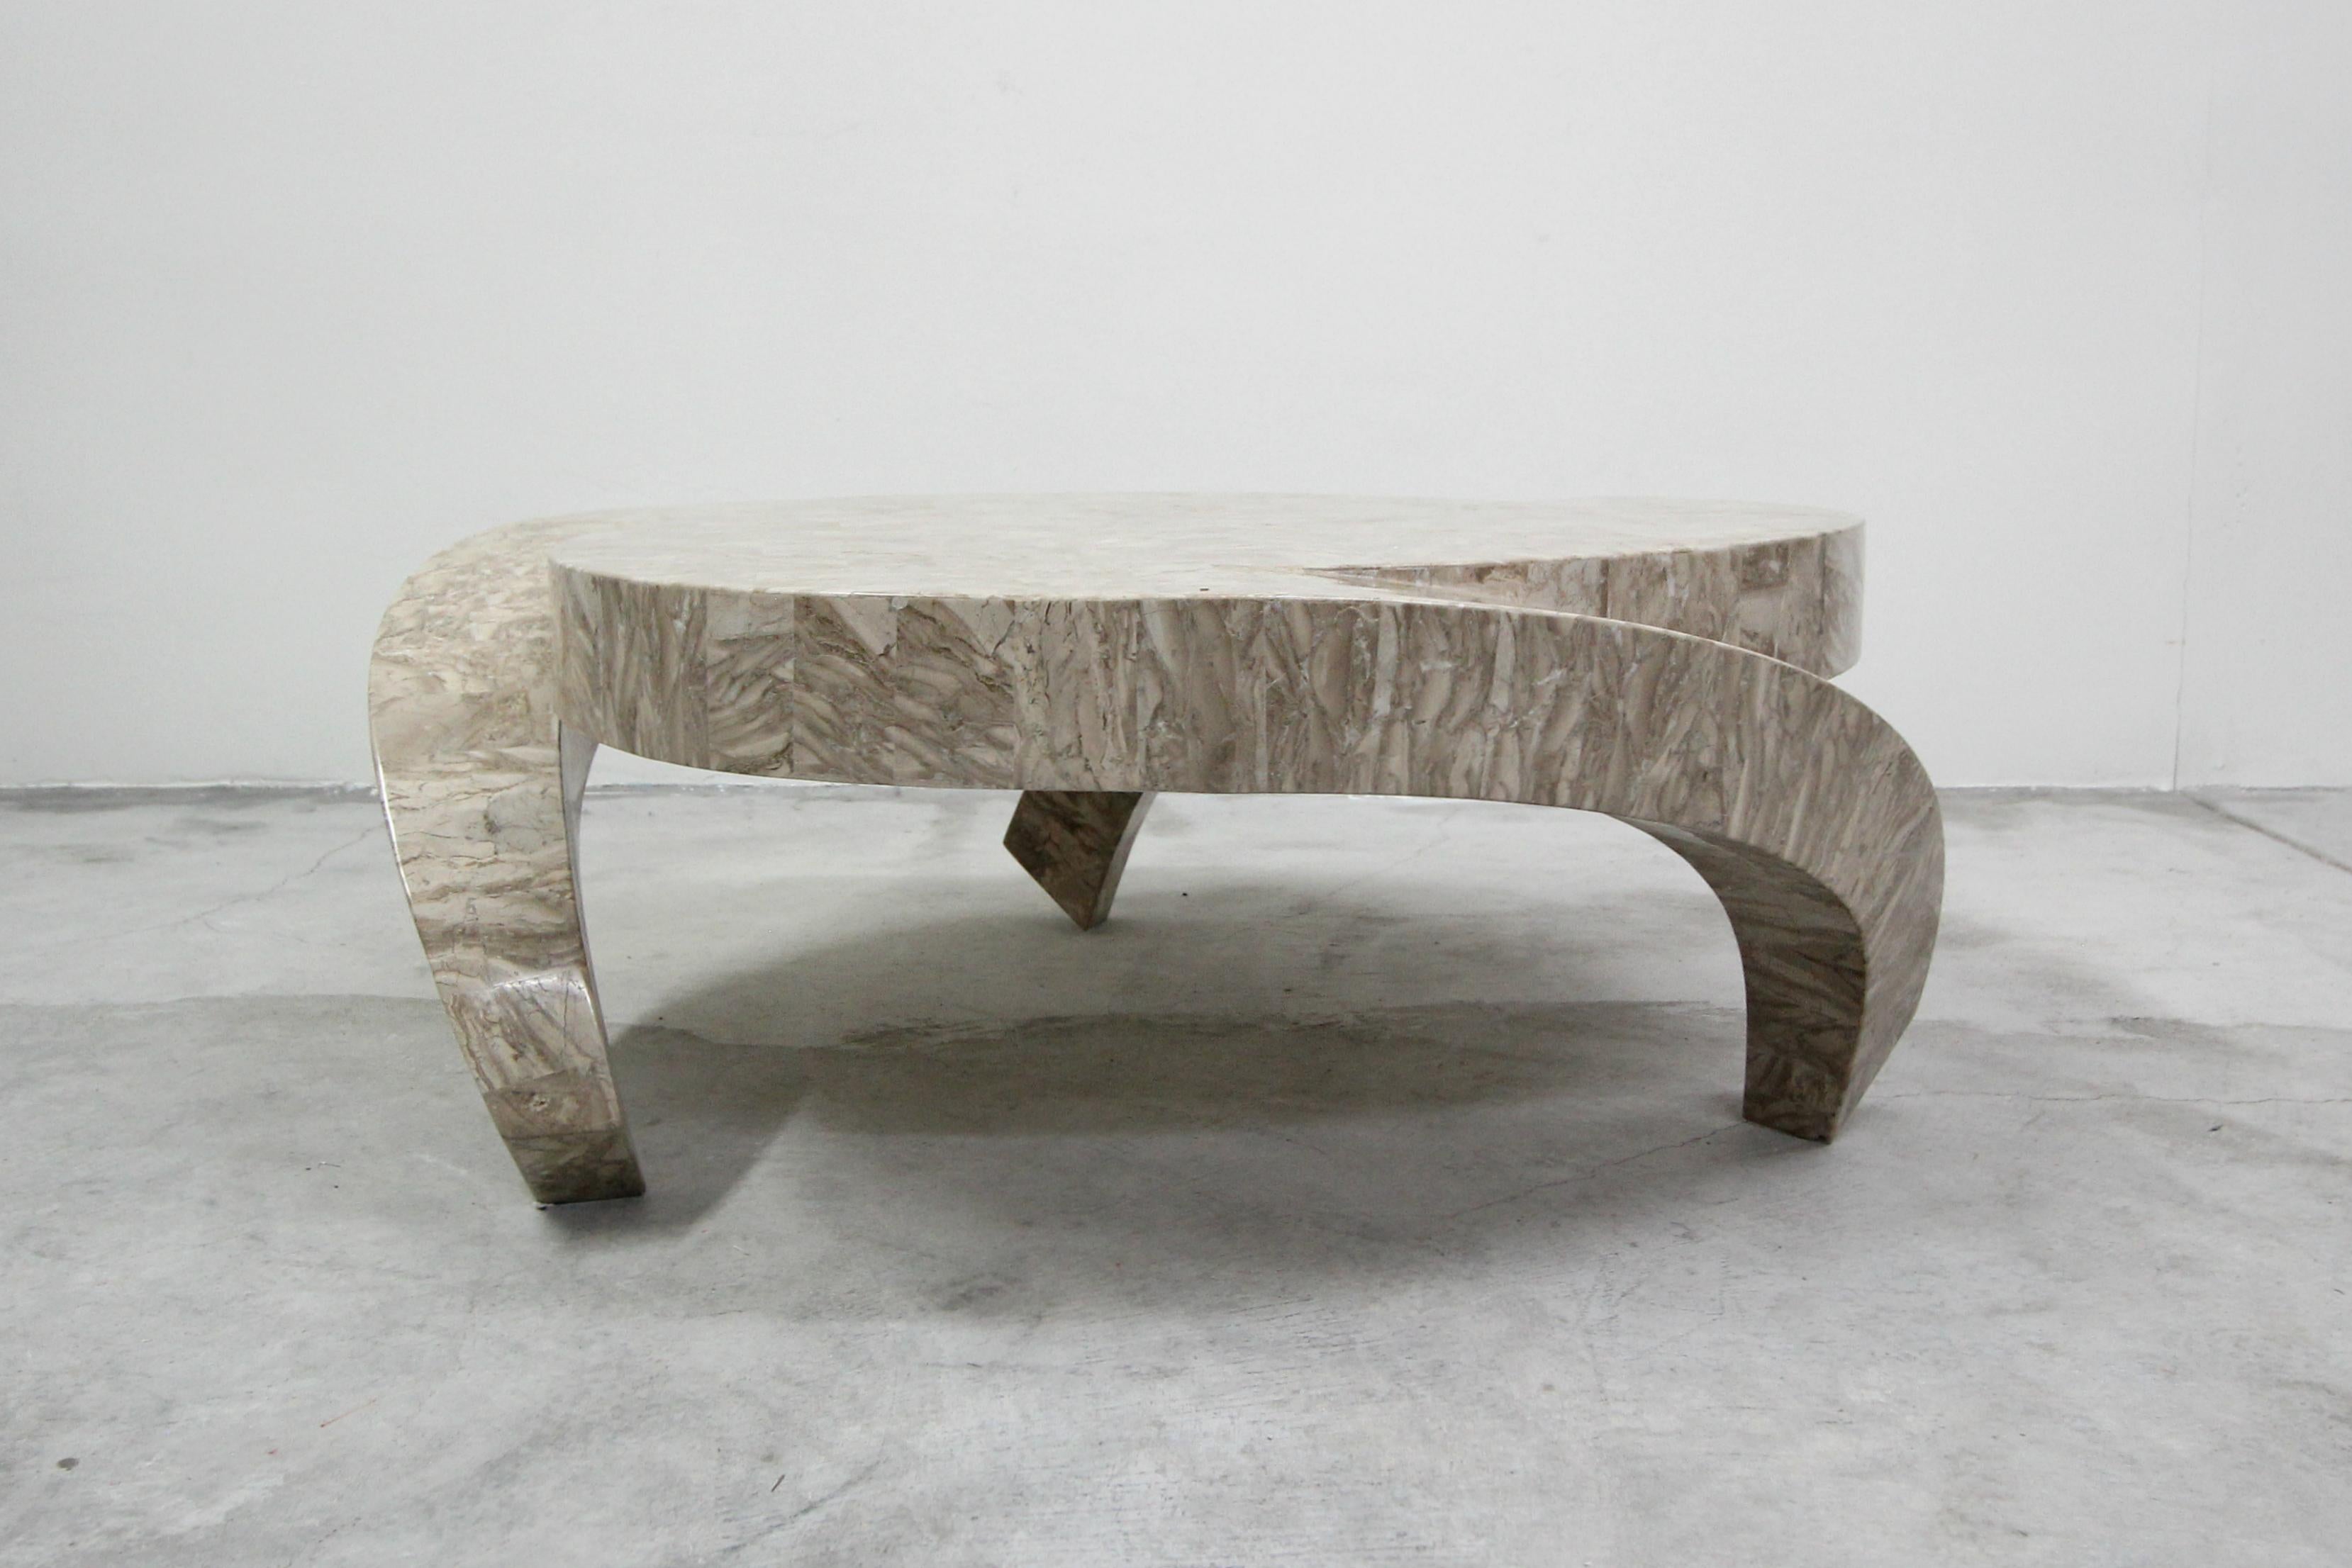 Unique tessellated stone coffee table by Maitland Smith. Table has a very eye-catching, trefoil shape, with three waterfall legs. Very designer, you'll likely never see another like it.